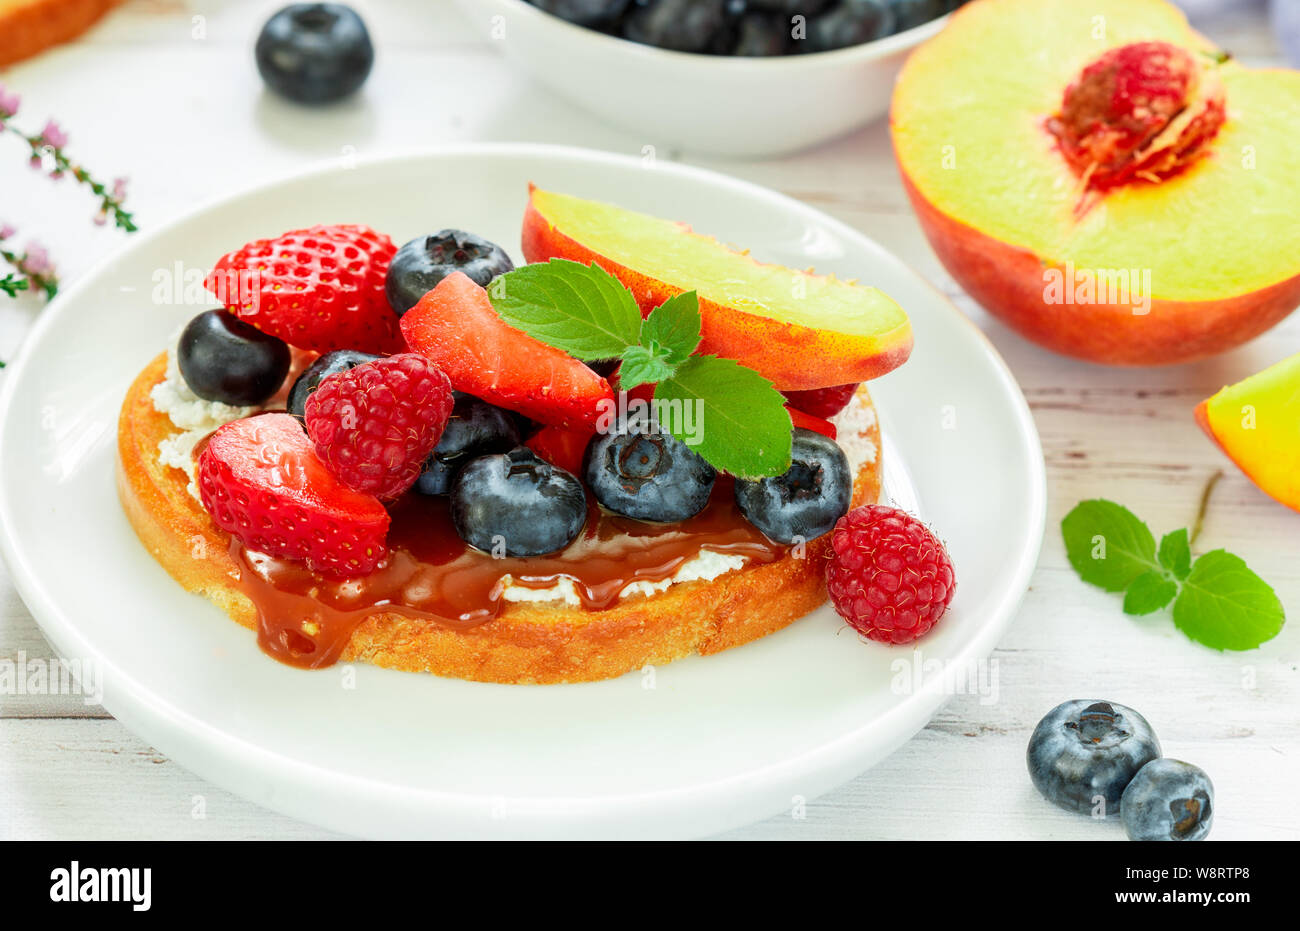 Delicious breakfast. Delicacy sandwich Toasts with cream cheese or mascarpone, caramel (iris toffee) and fresh berries - blueberries, raspberries, str Stock Photo